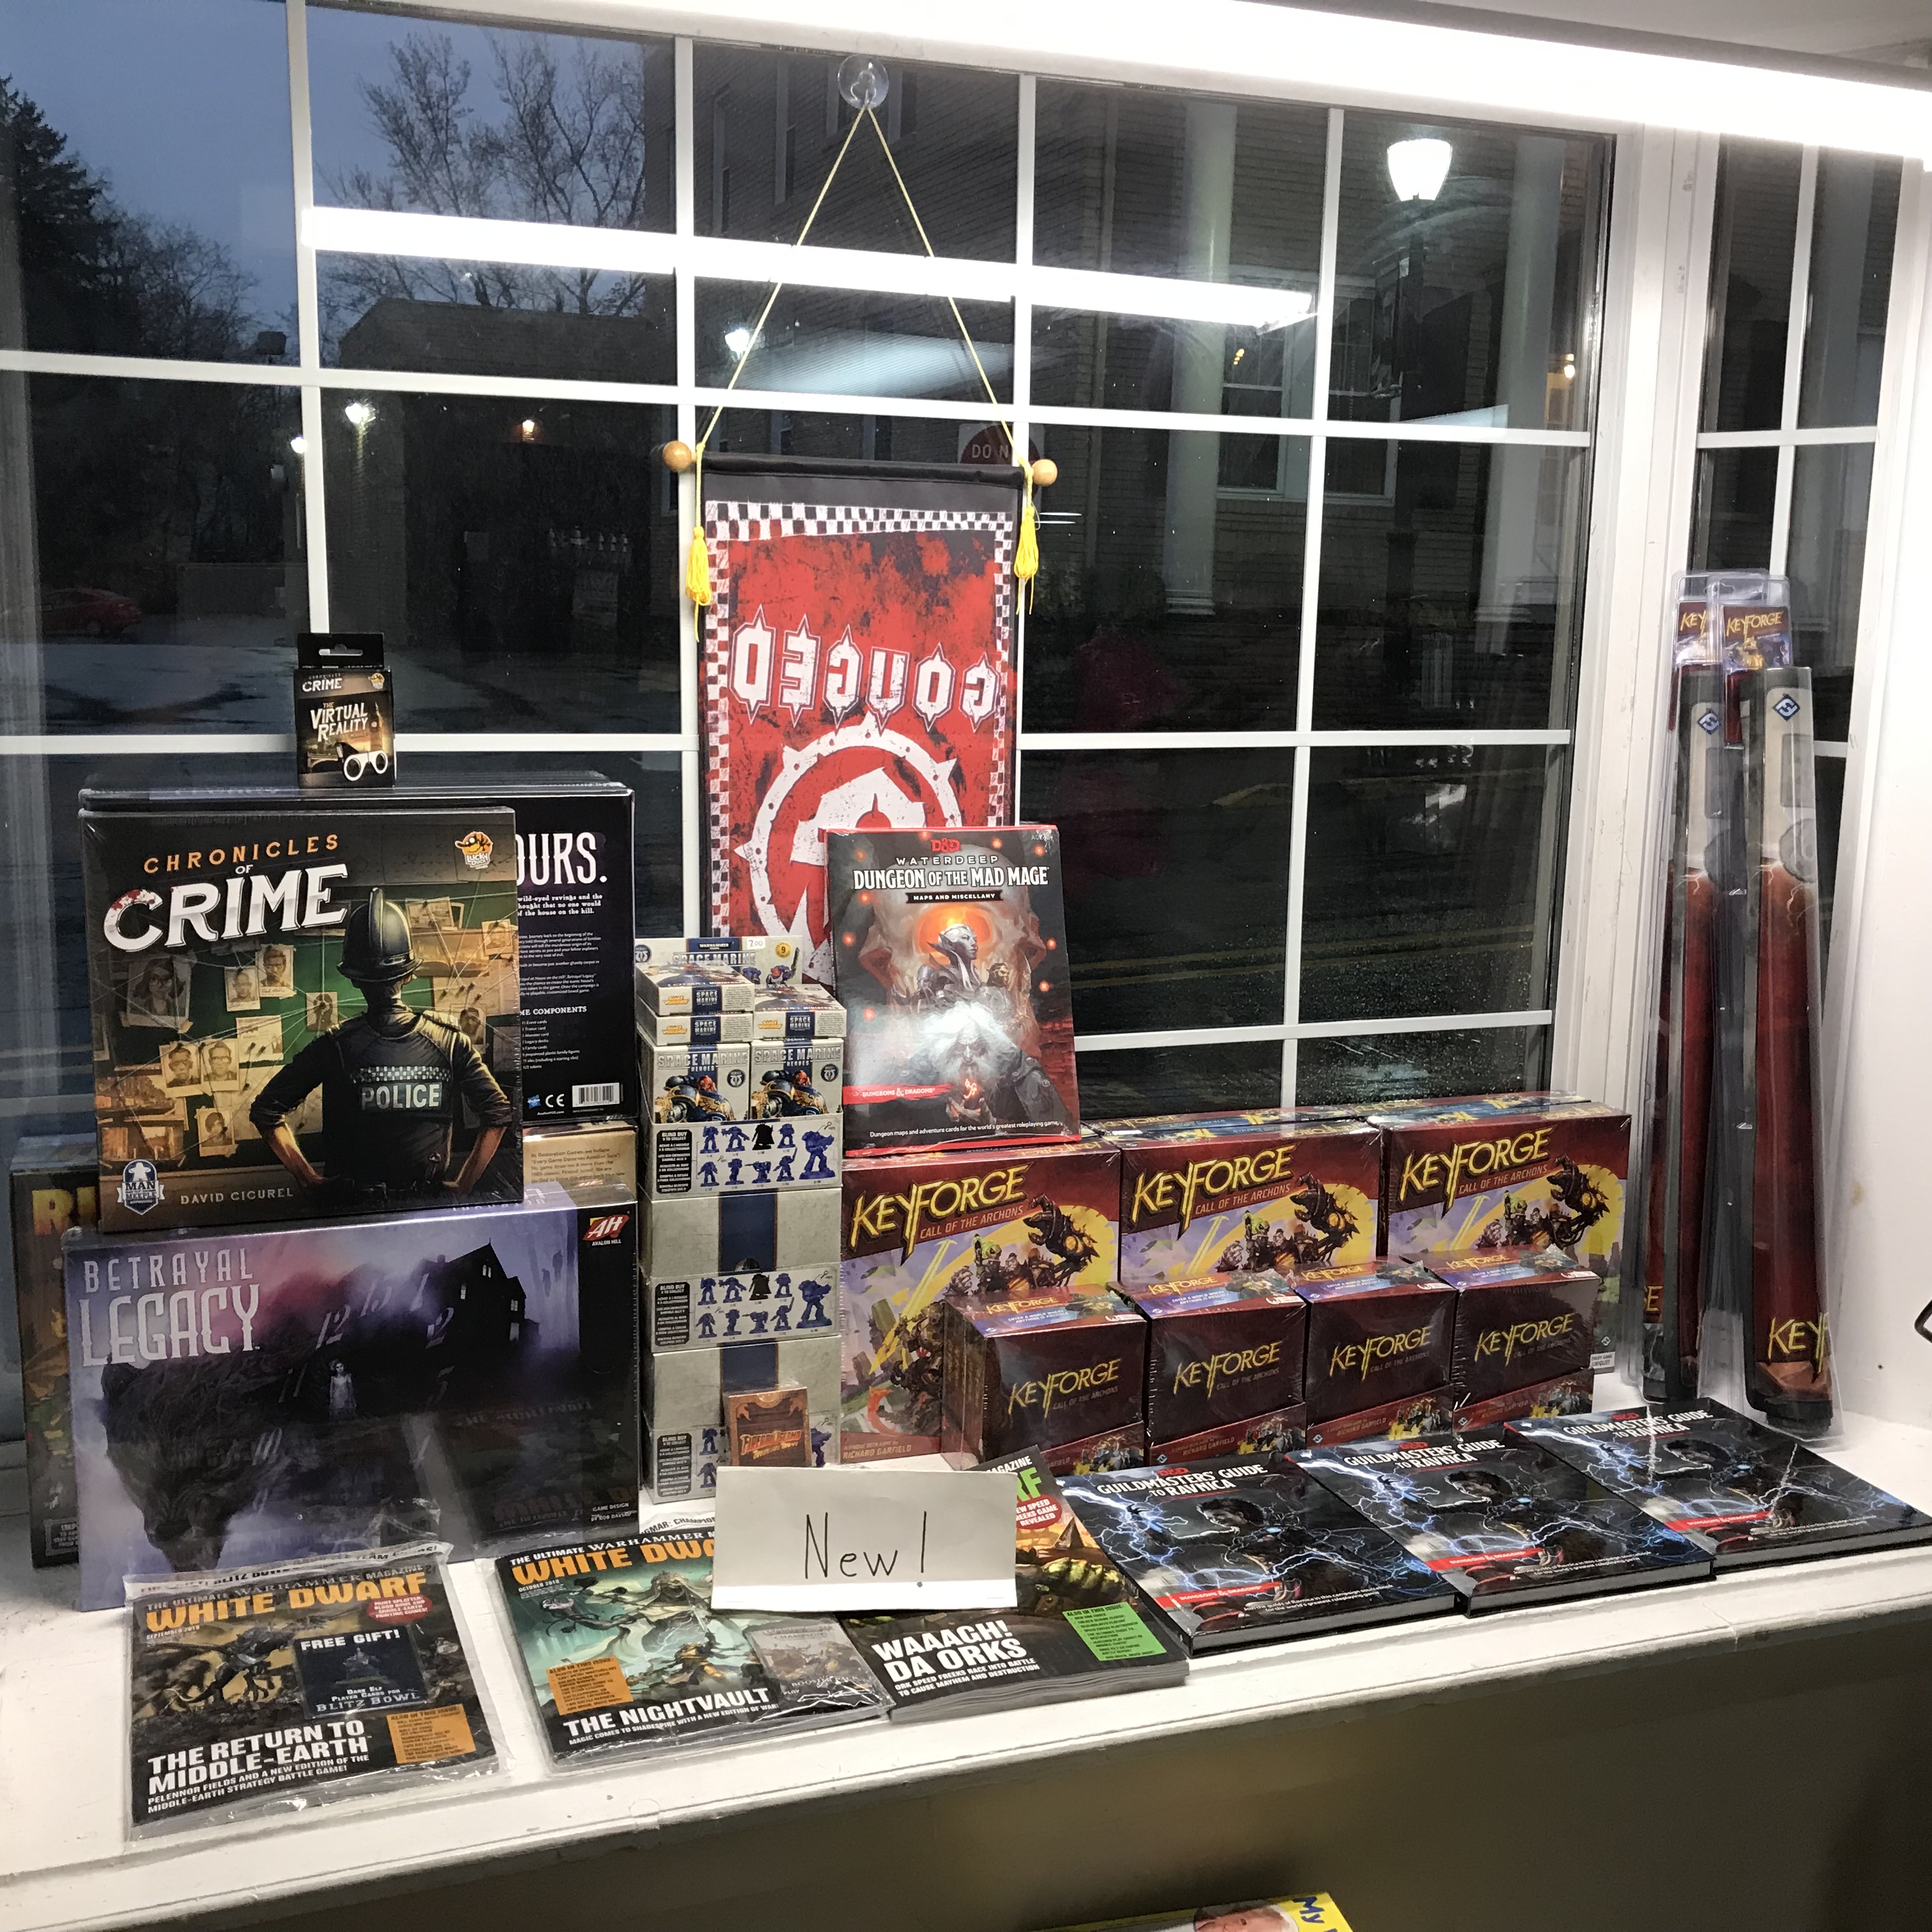 Keyforge, Chronicles of Crime, and Betrayal Legacy!